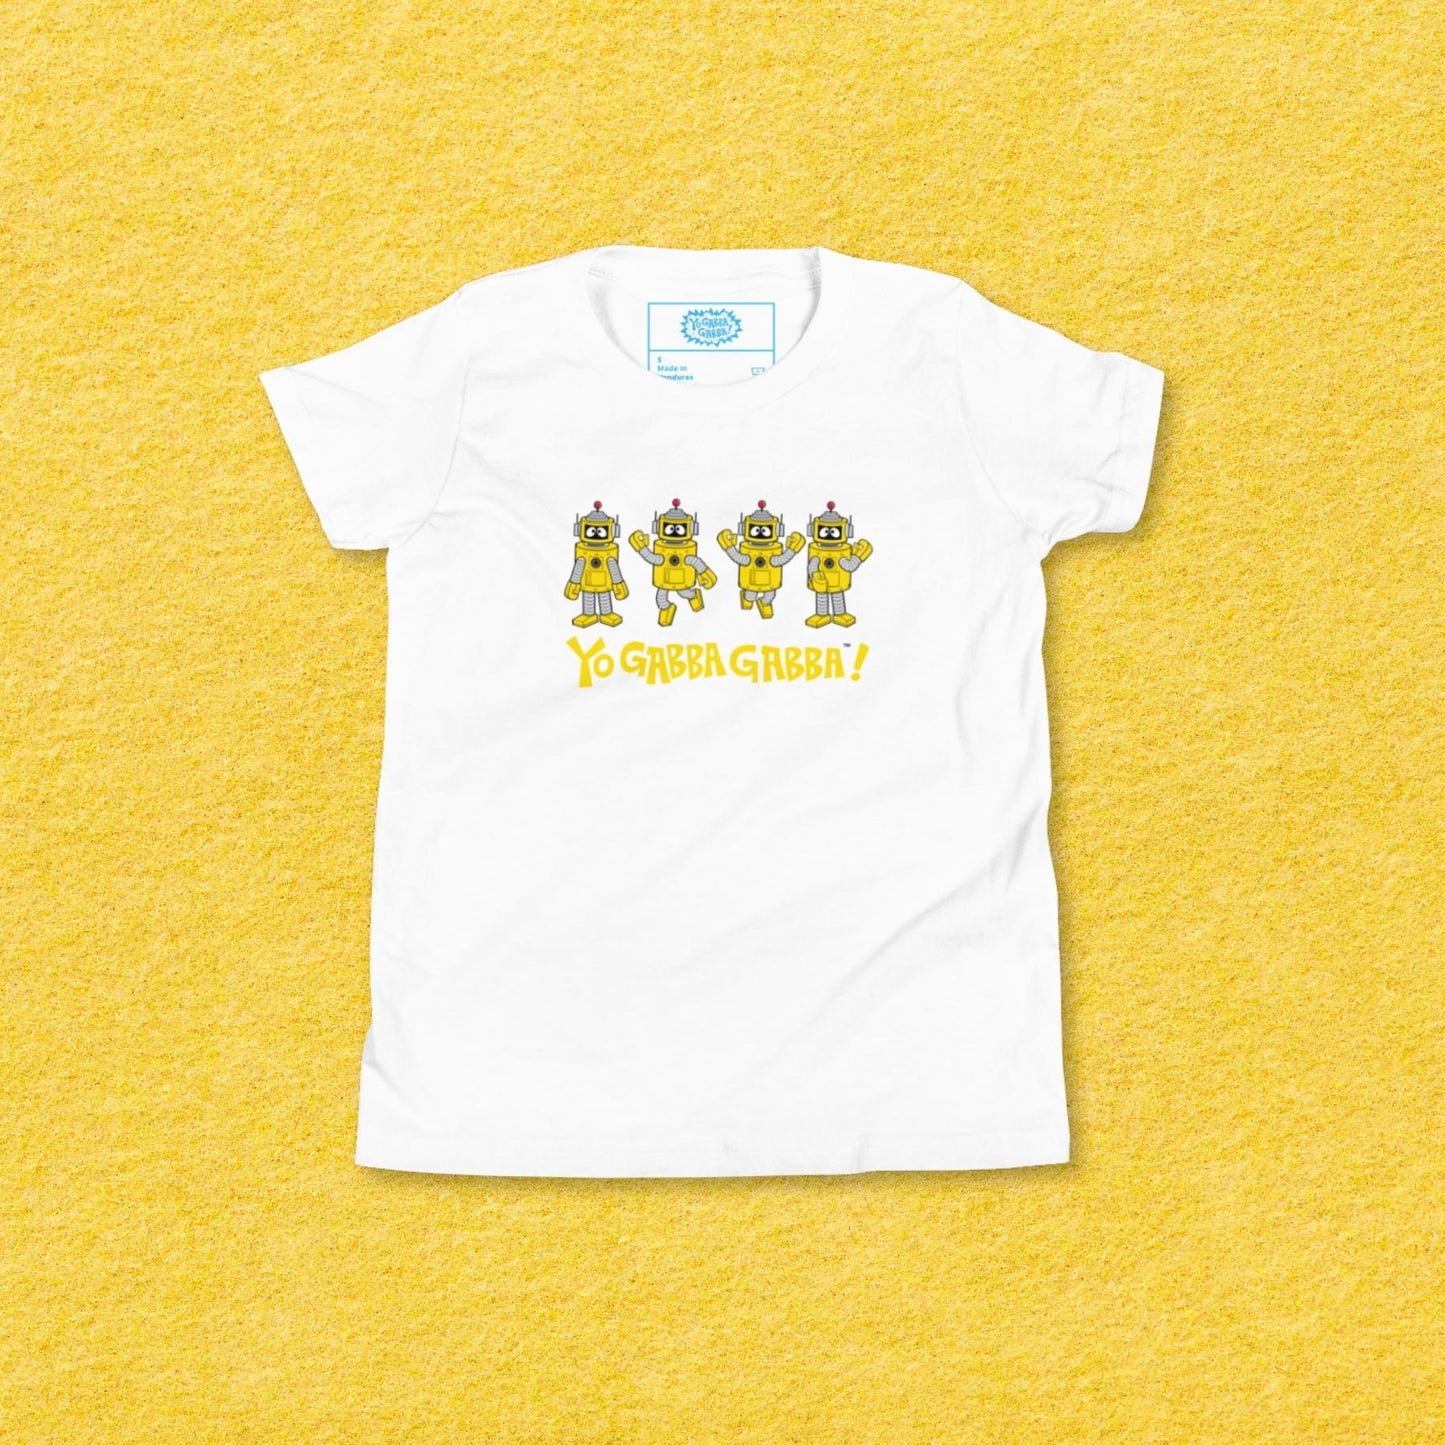 Plex Youth Character Tee!